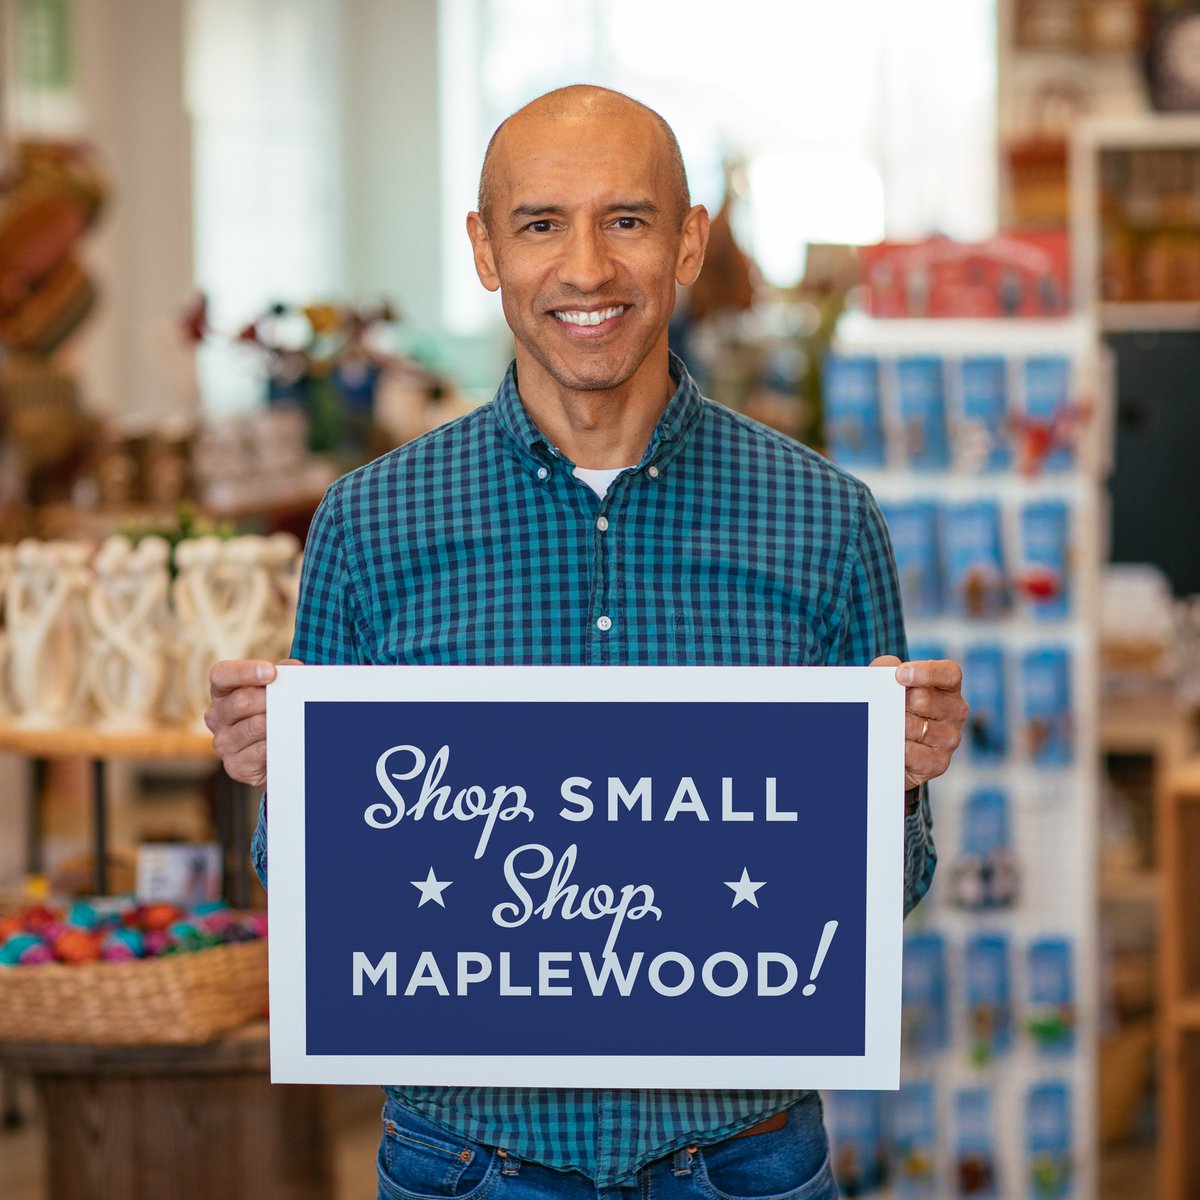 Today, we celebrate the small businesses that make Maplewood the diverse and vibrant place it is. Let’s support them today and all year round by shopping local. #EnjoyMaplewood #ShopLocal #SmallBusinessSaturday